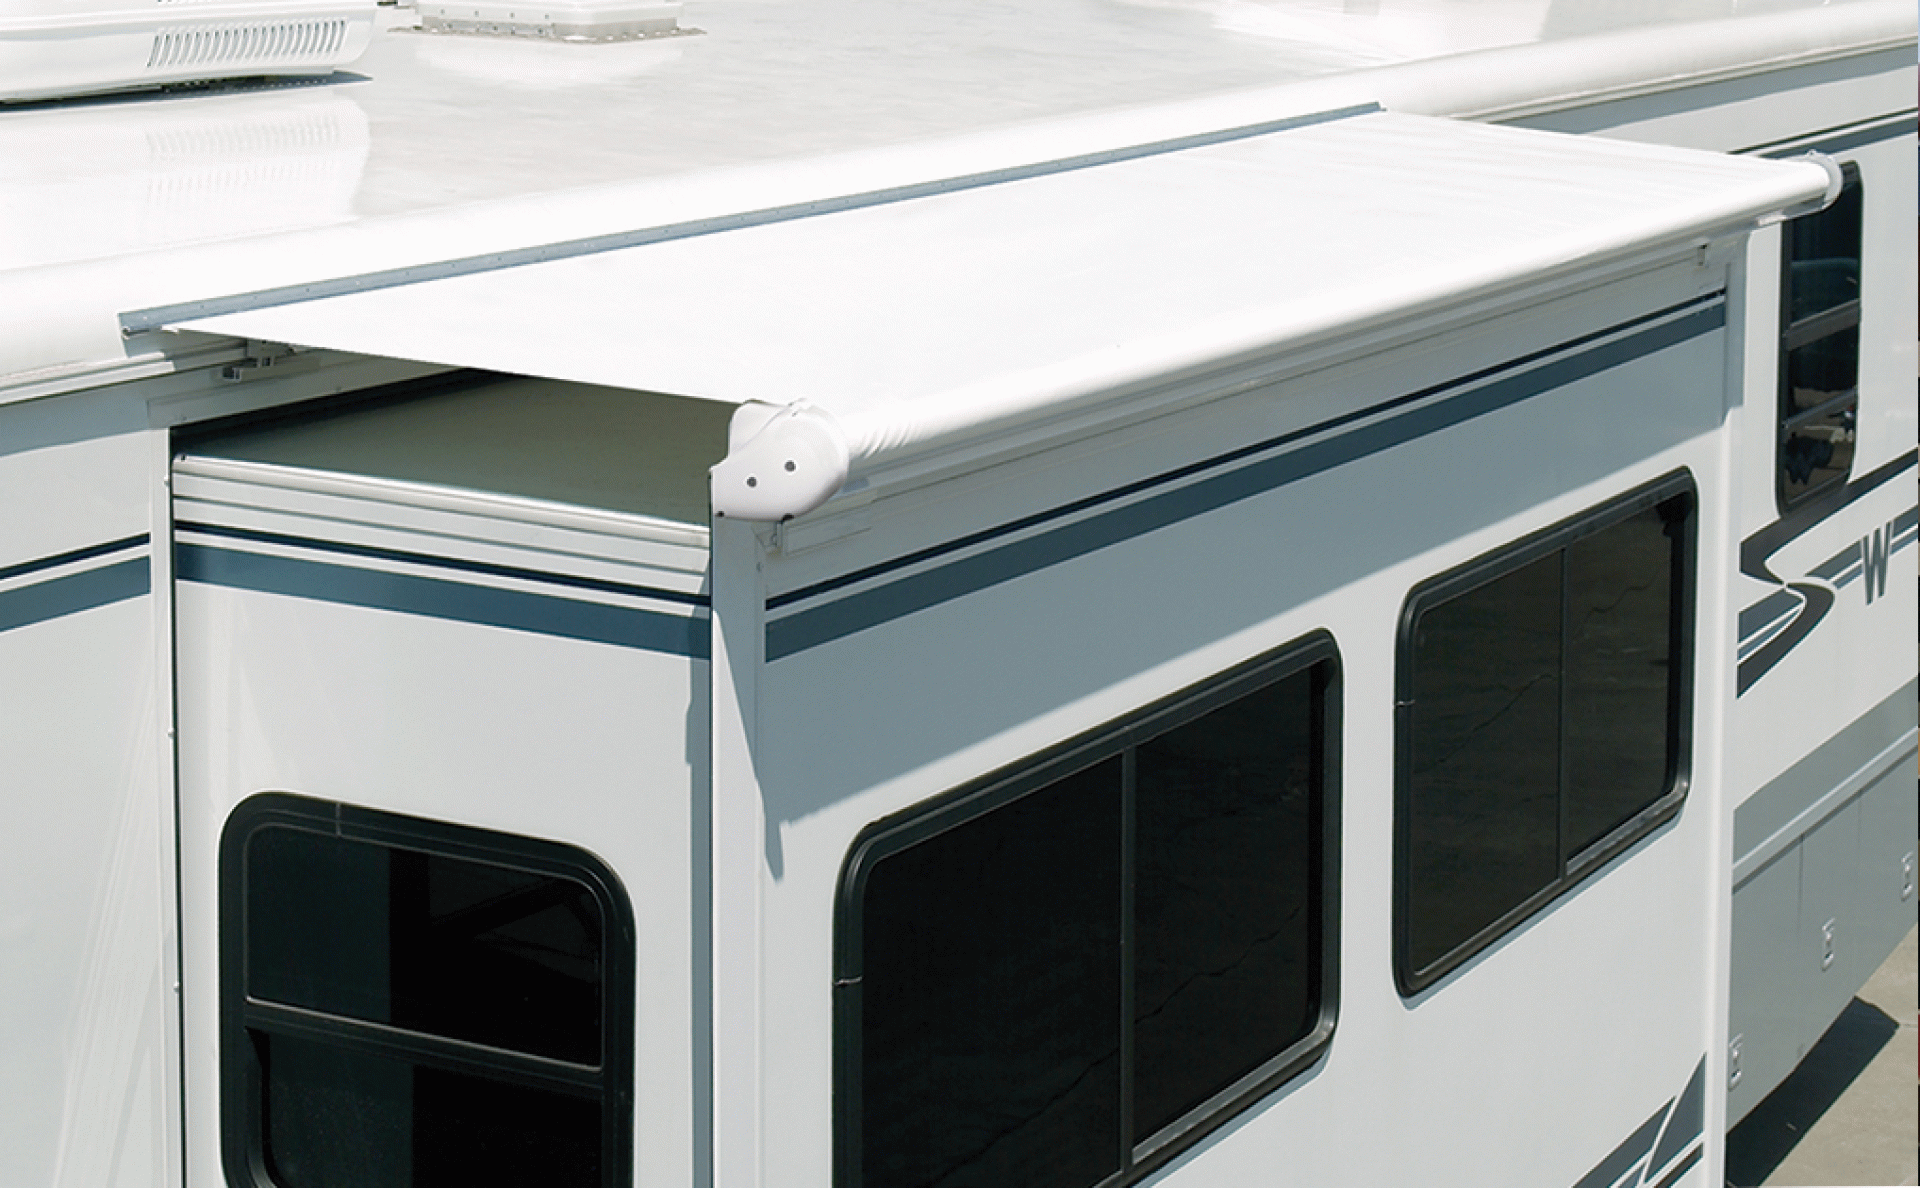 CAREFREE OF COLORADO | UQ1690025 | SIDEOUT KOVER III AWNING 166" - 169" ROOF RANGE WHITE VINYL FABRIC & DEFLECTOR